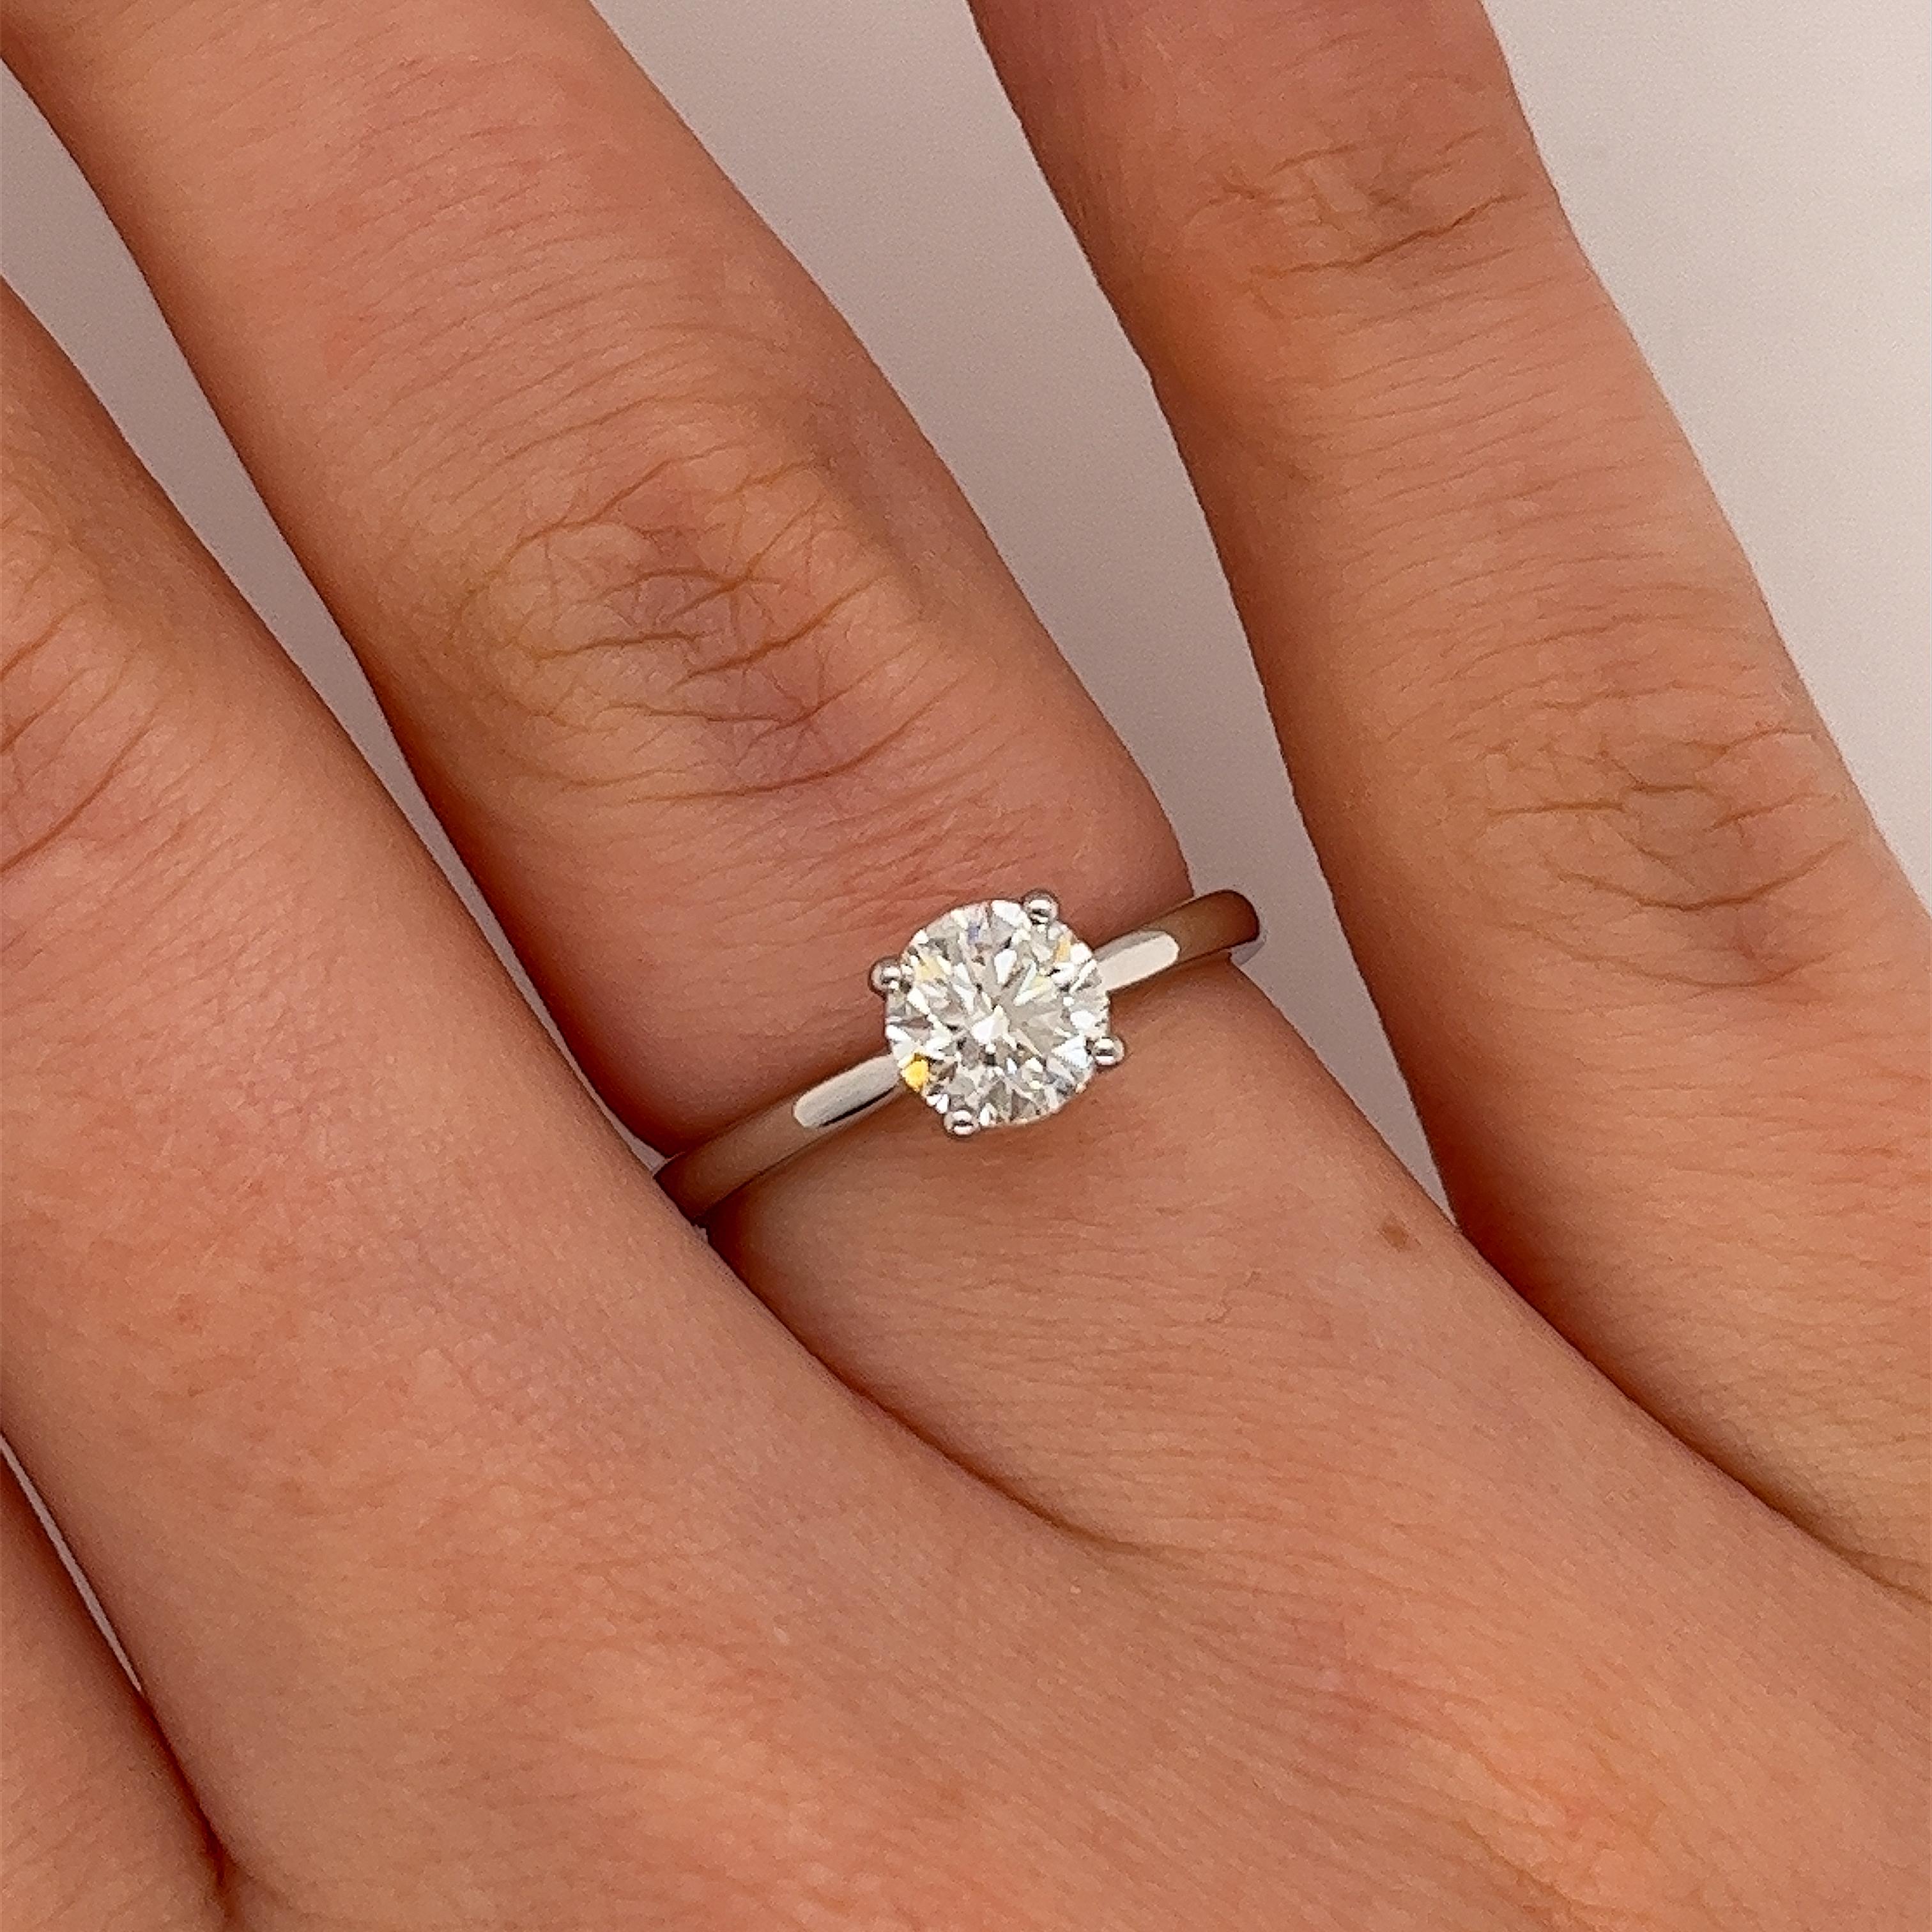 This gorgeous solitaire diamond ring set with 0.80ct I/SI1 round brilliant cut diamond  
in platinum setting can make a perfect engagement ring.
Total Diamond Weight: 0.80ct
Diamond Colour: I
Diamond Clarity: SI1
Width of Band: 2.30mm
Width of Head: